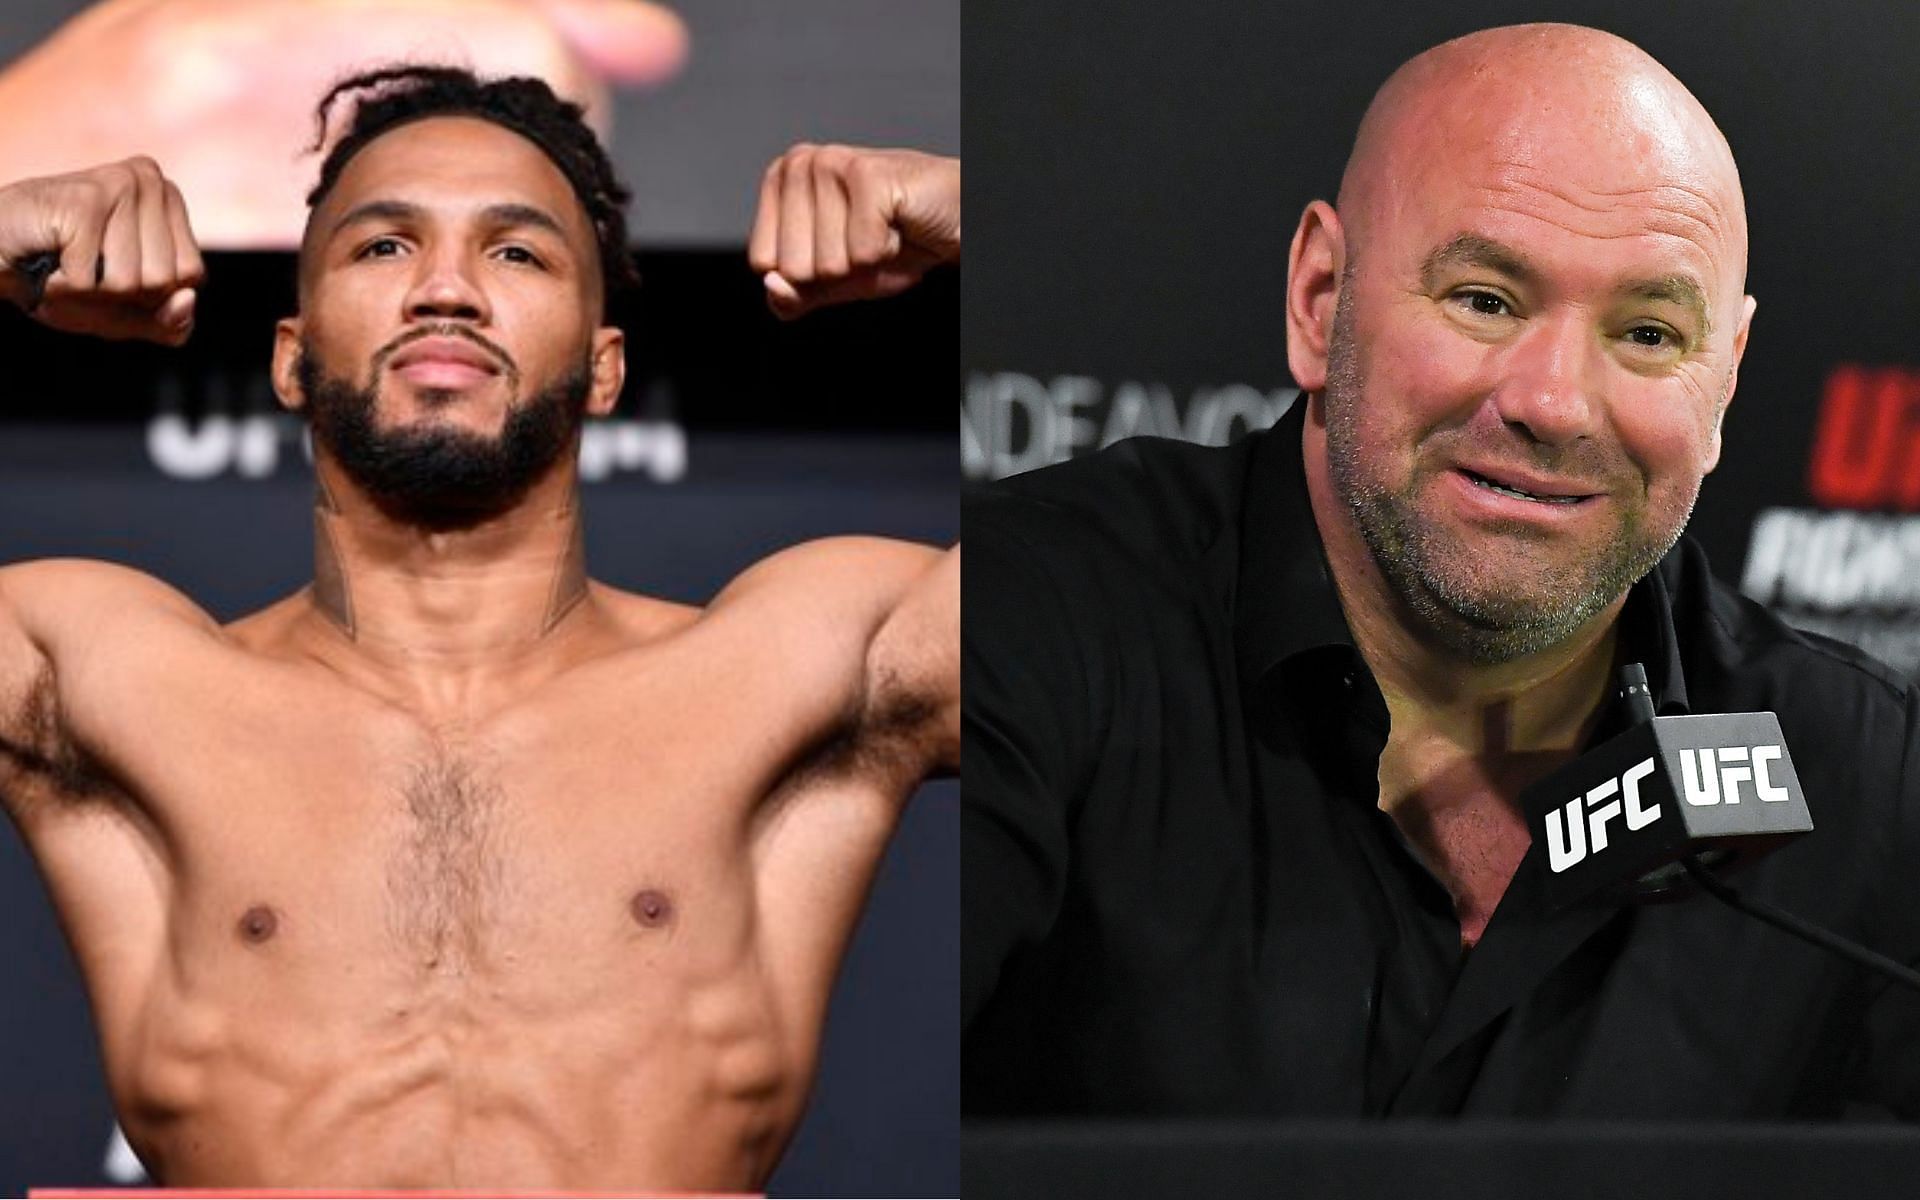 Kevin Lee (left) and Dana White (right) (Image credits Getty Images and @MoTownPhenom on Twitter)